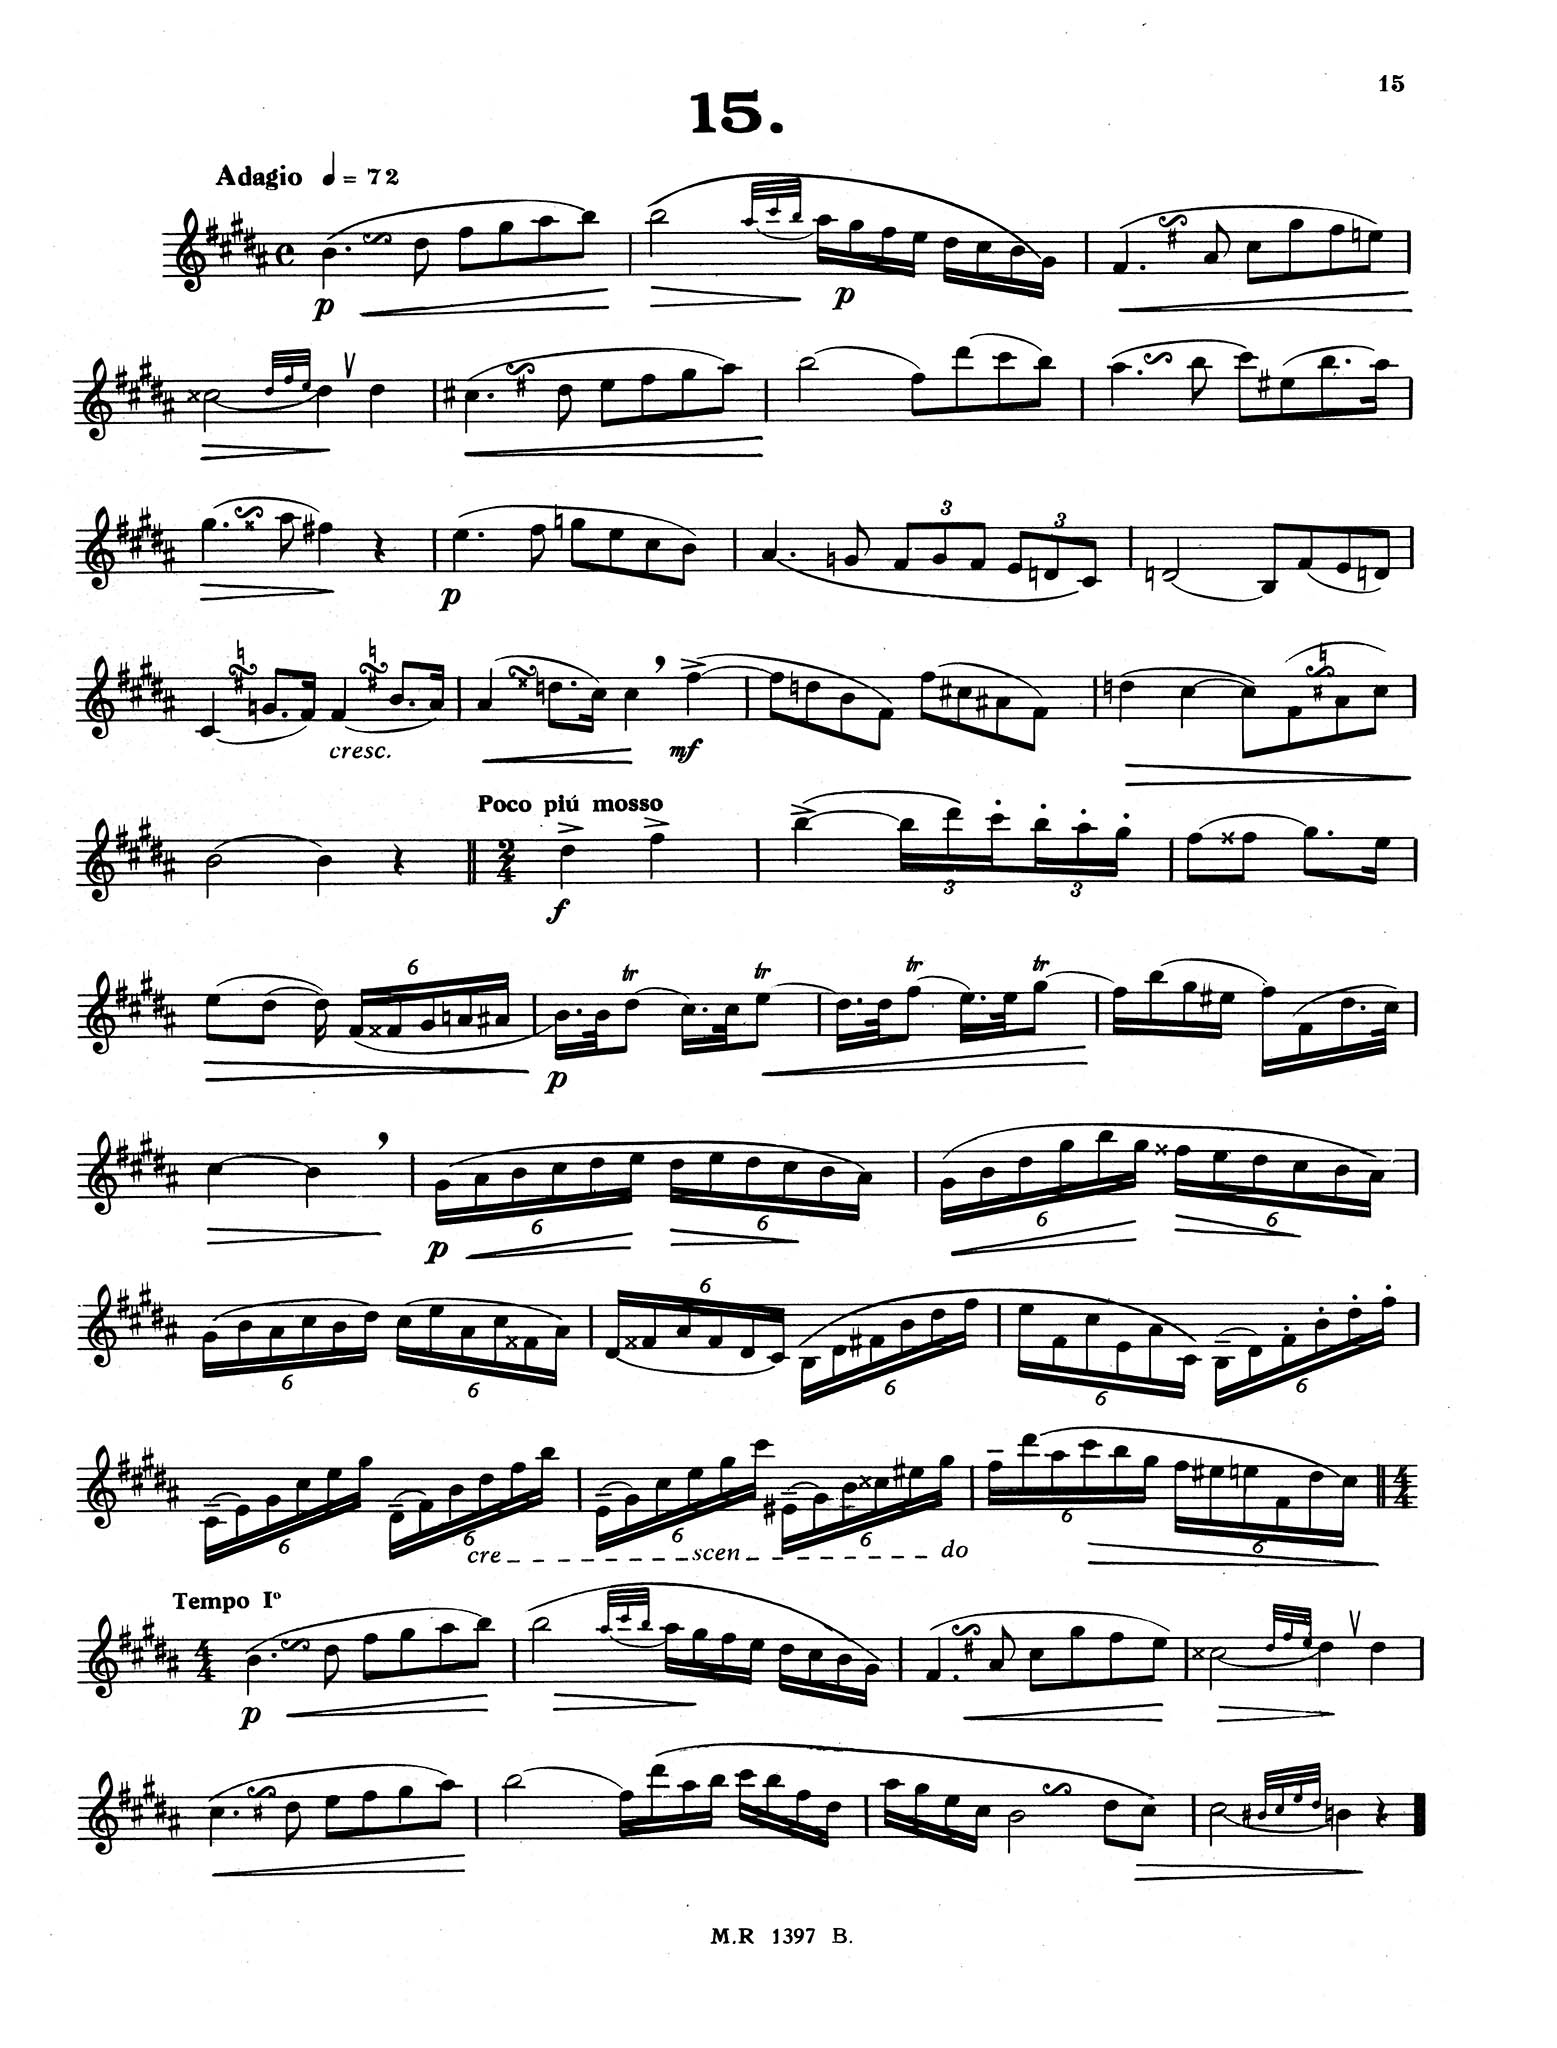 24 Etudes for Clarinet Page 15